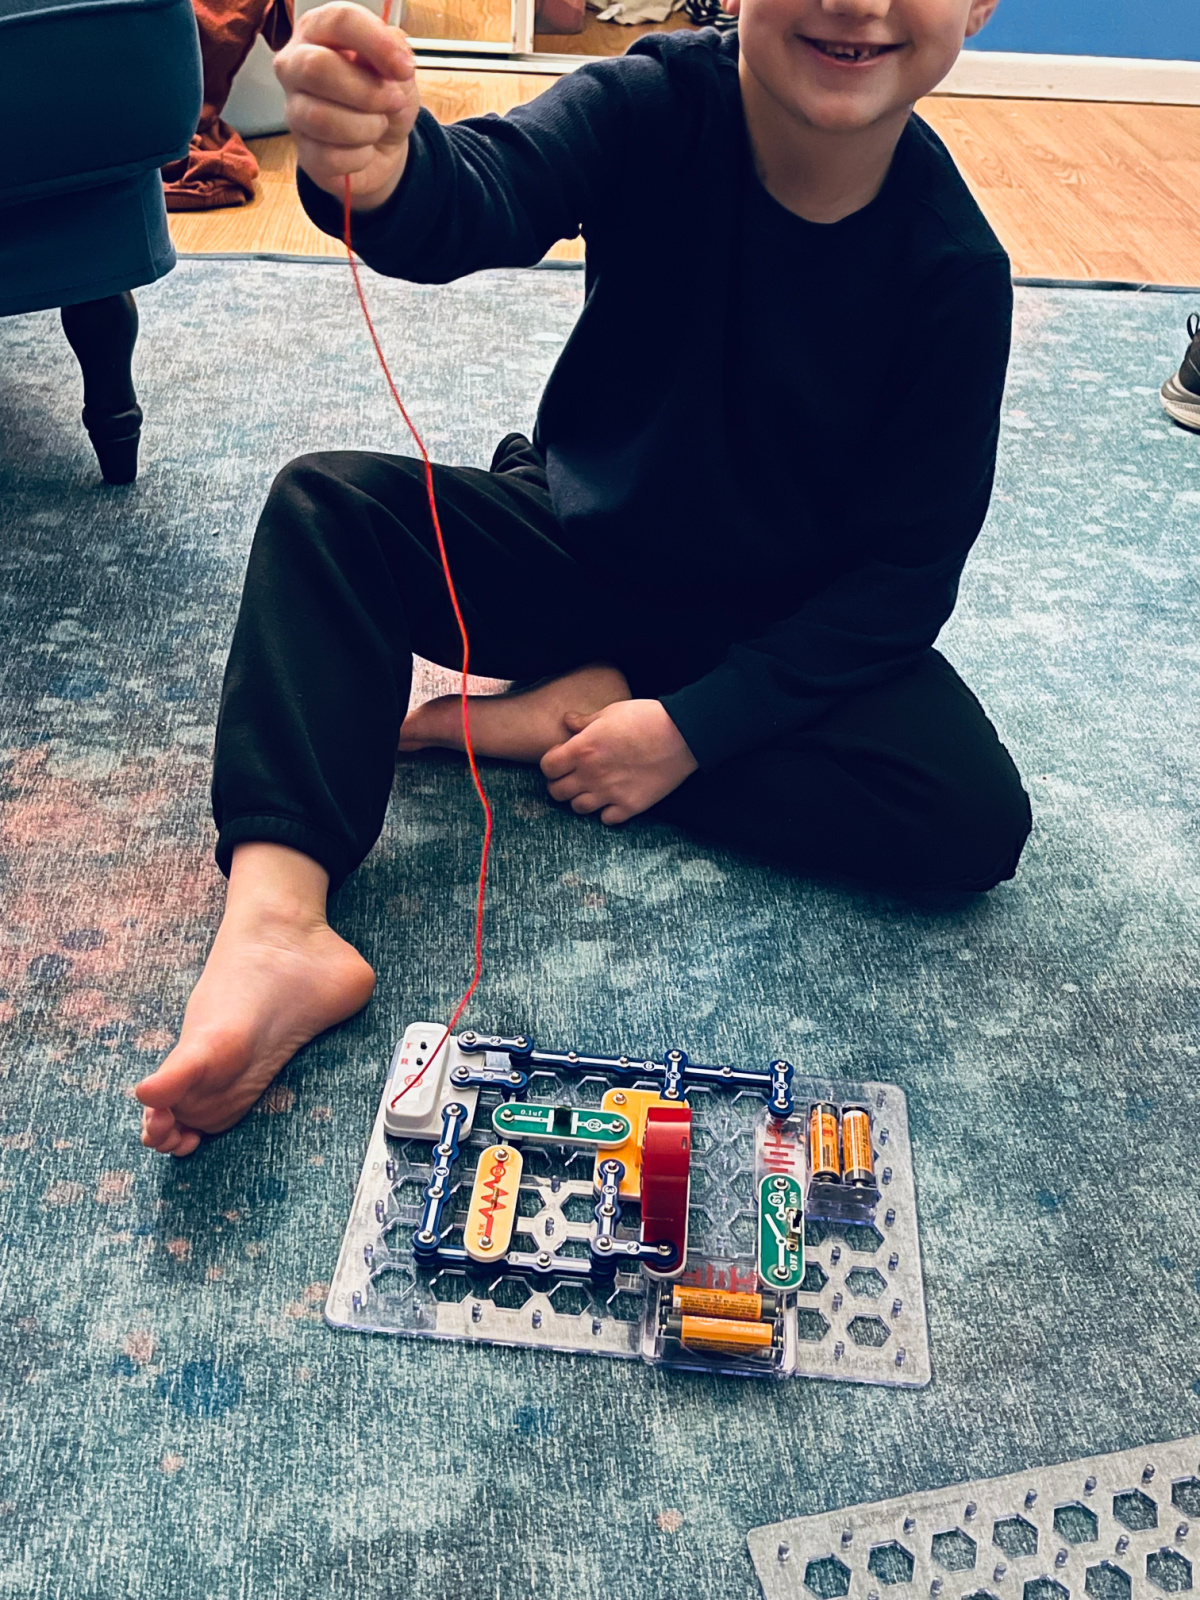 young boy showing off Snap Circuits creation.